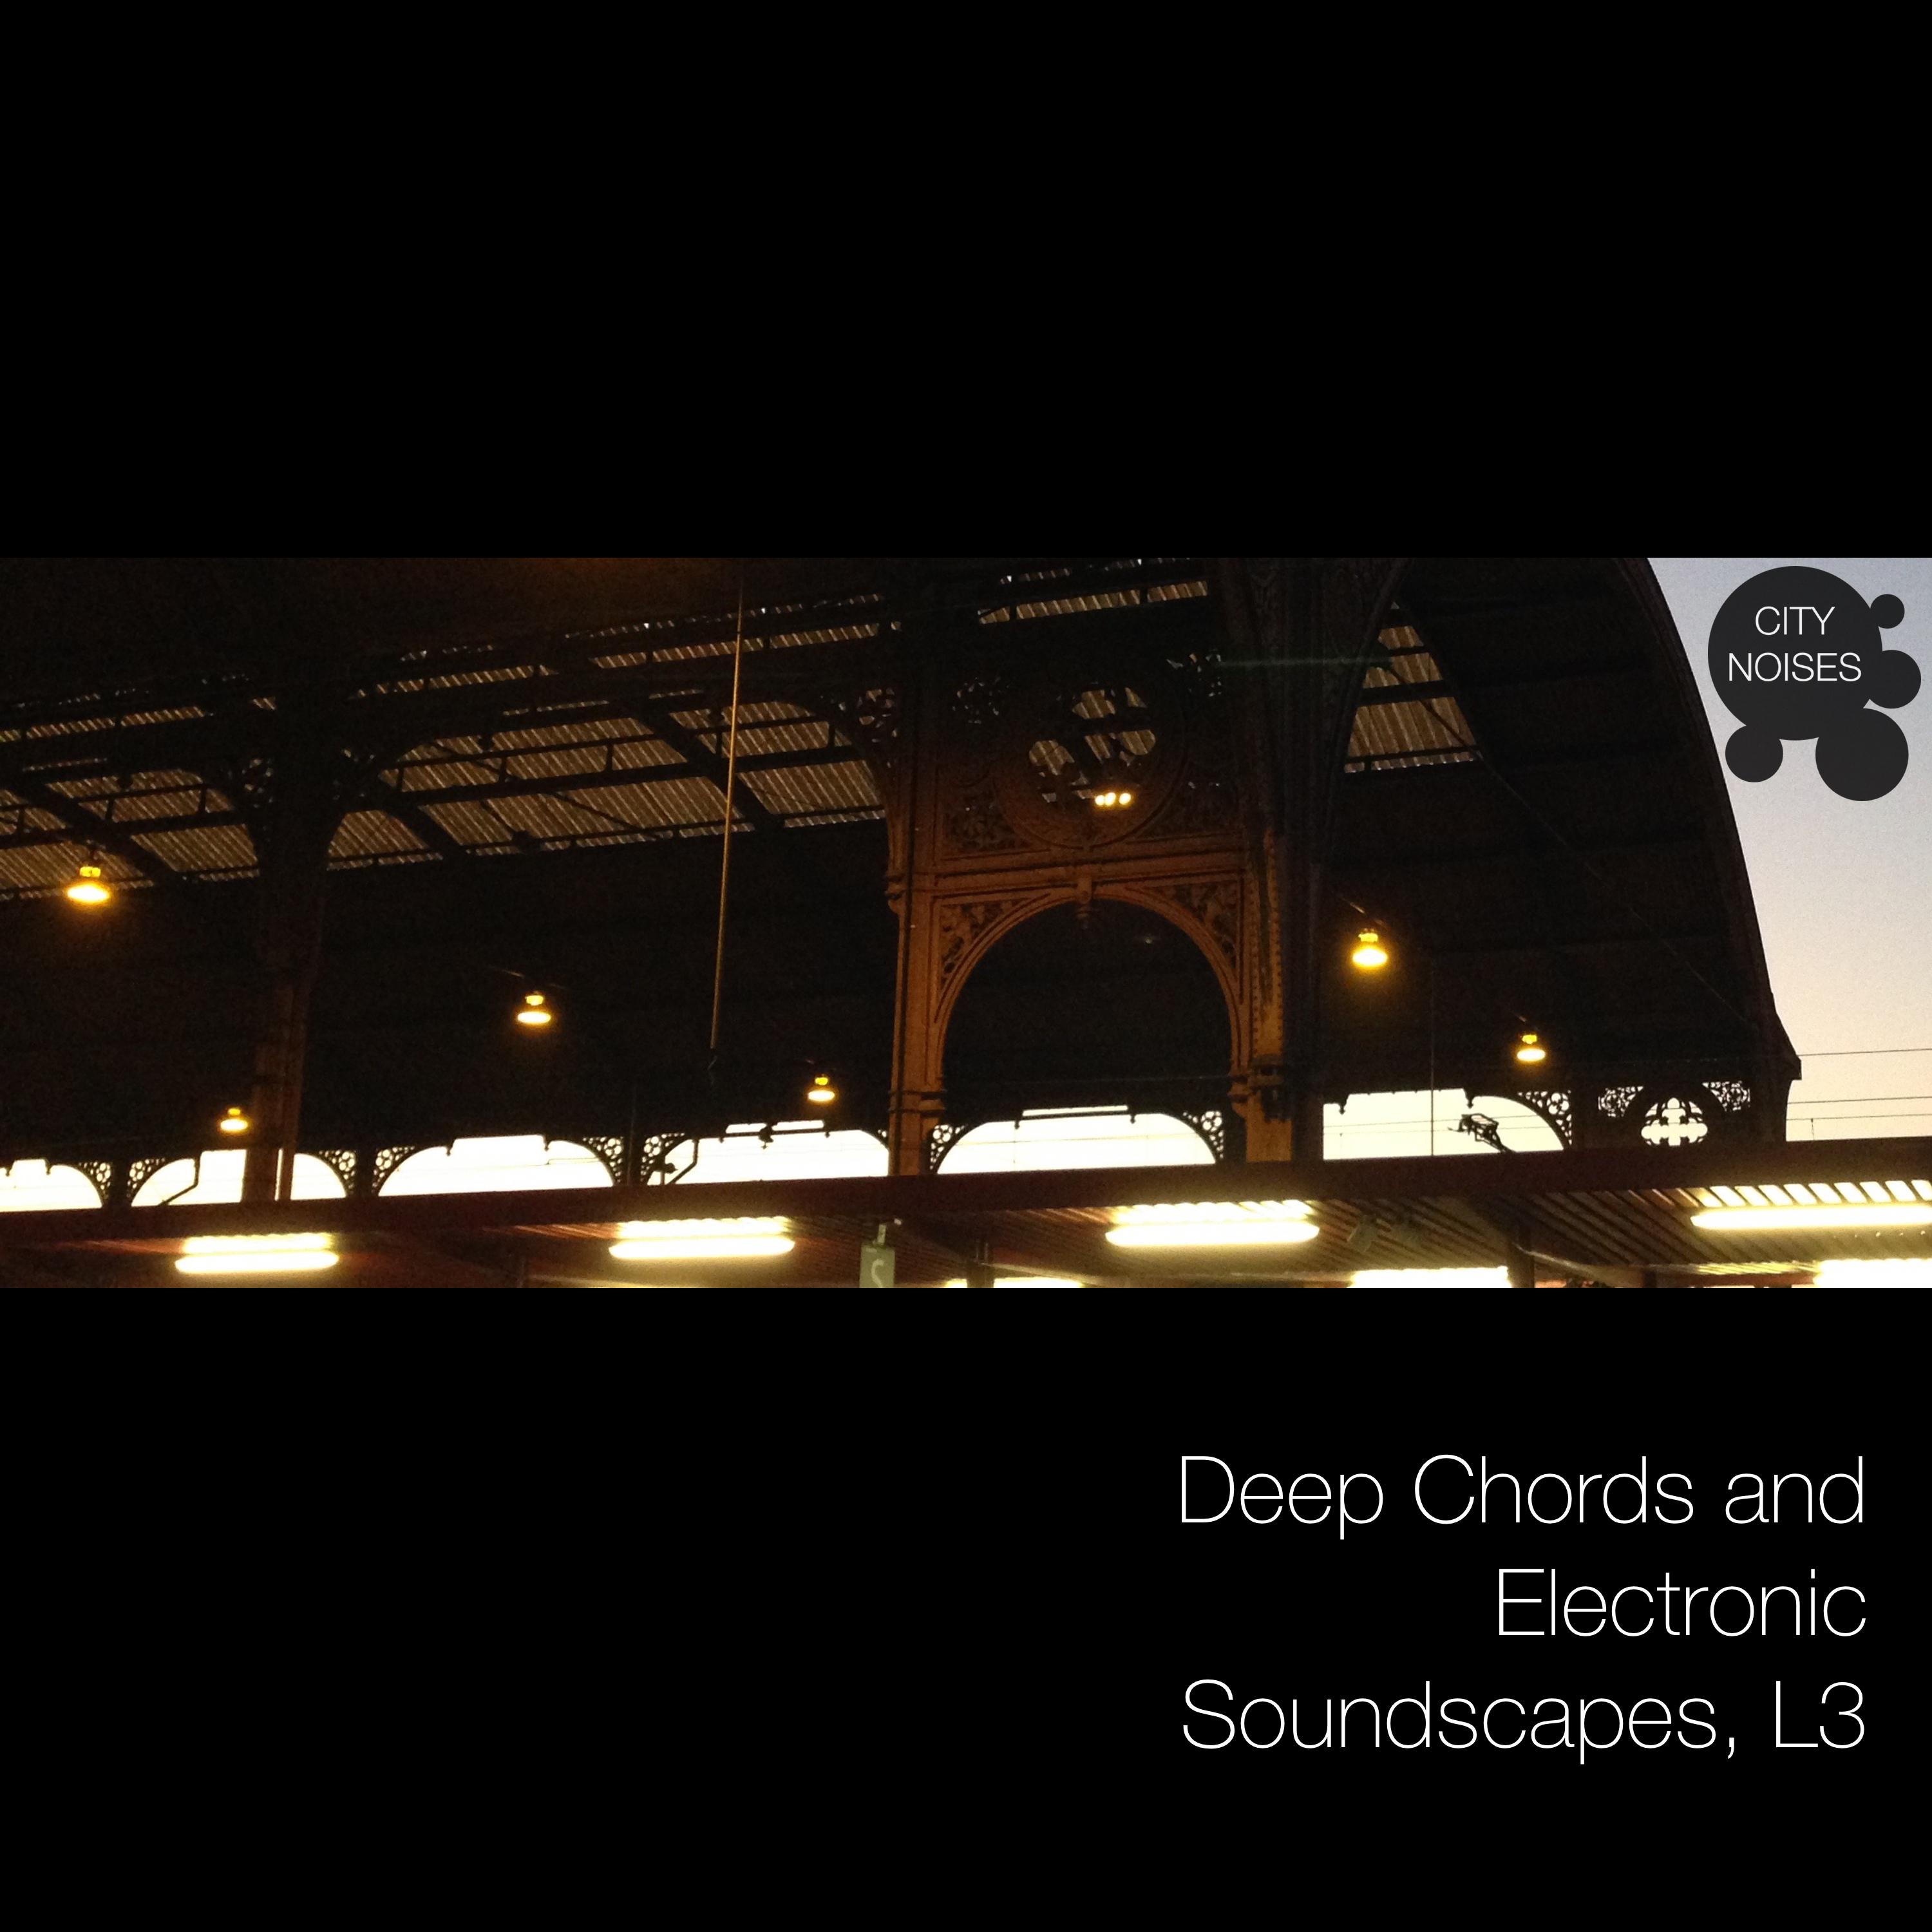 Deep Chords and Electronic Soundscapes, L3